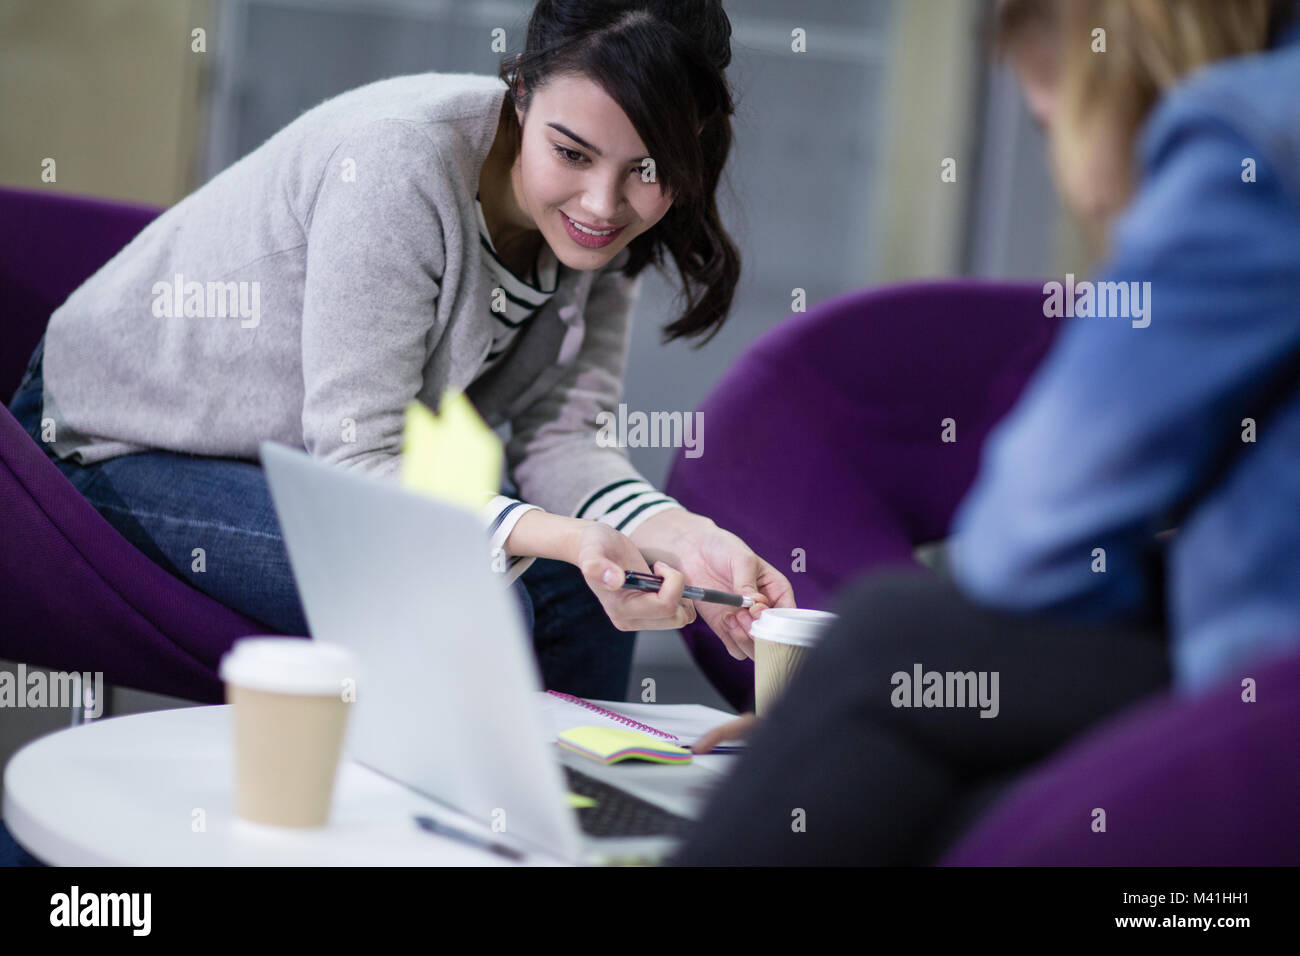 Female students working together Stock Photo